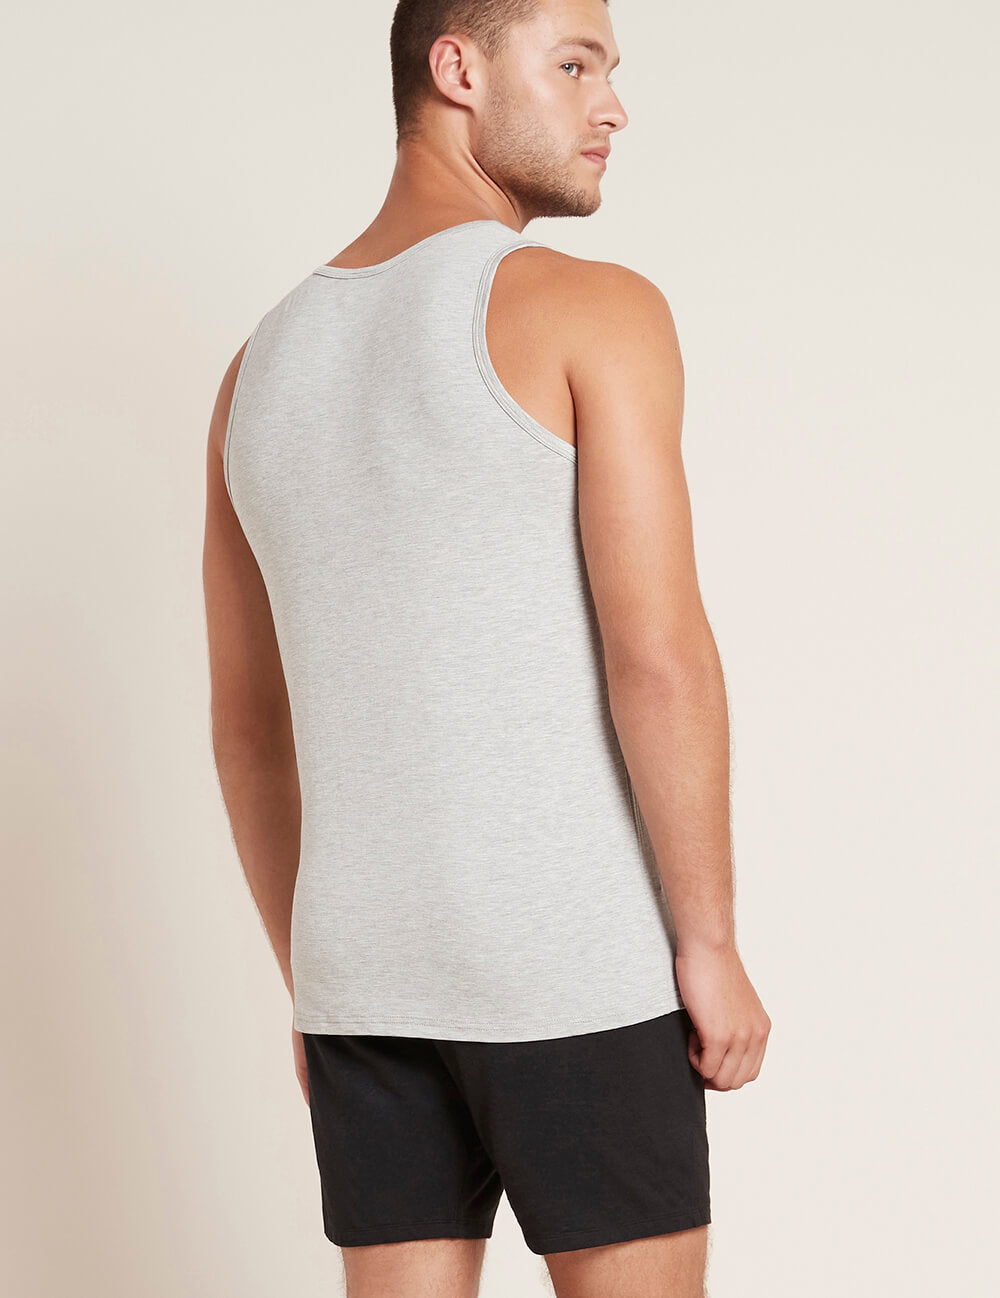 Boody Bamboo Men's Tank Top in Light Grey Back View